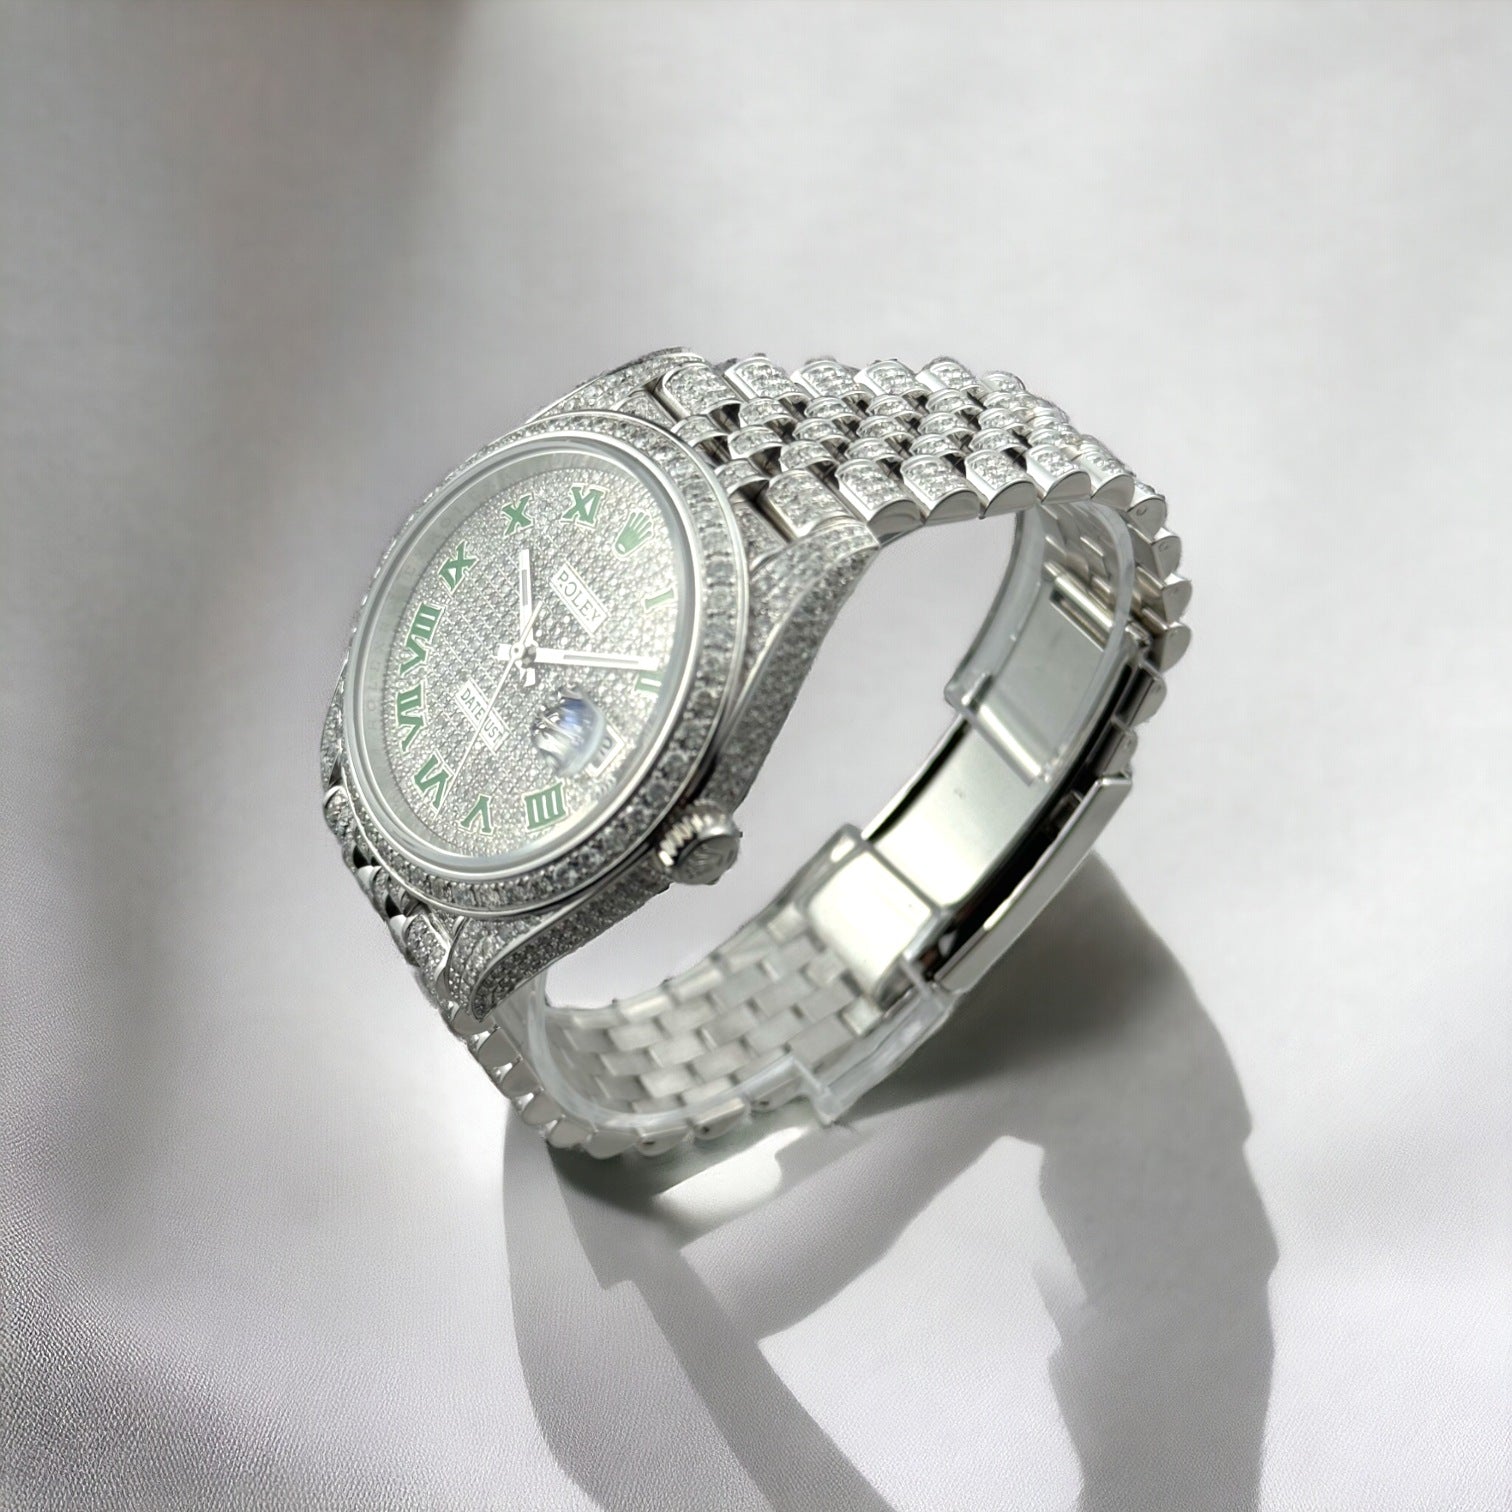 Rolex - Datejust 41 GREEN Enamel Index FULLY ICED OUT